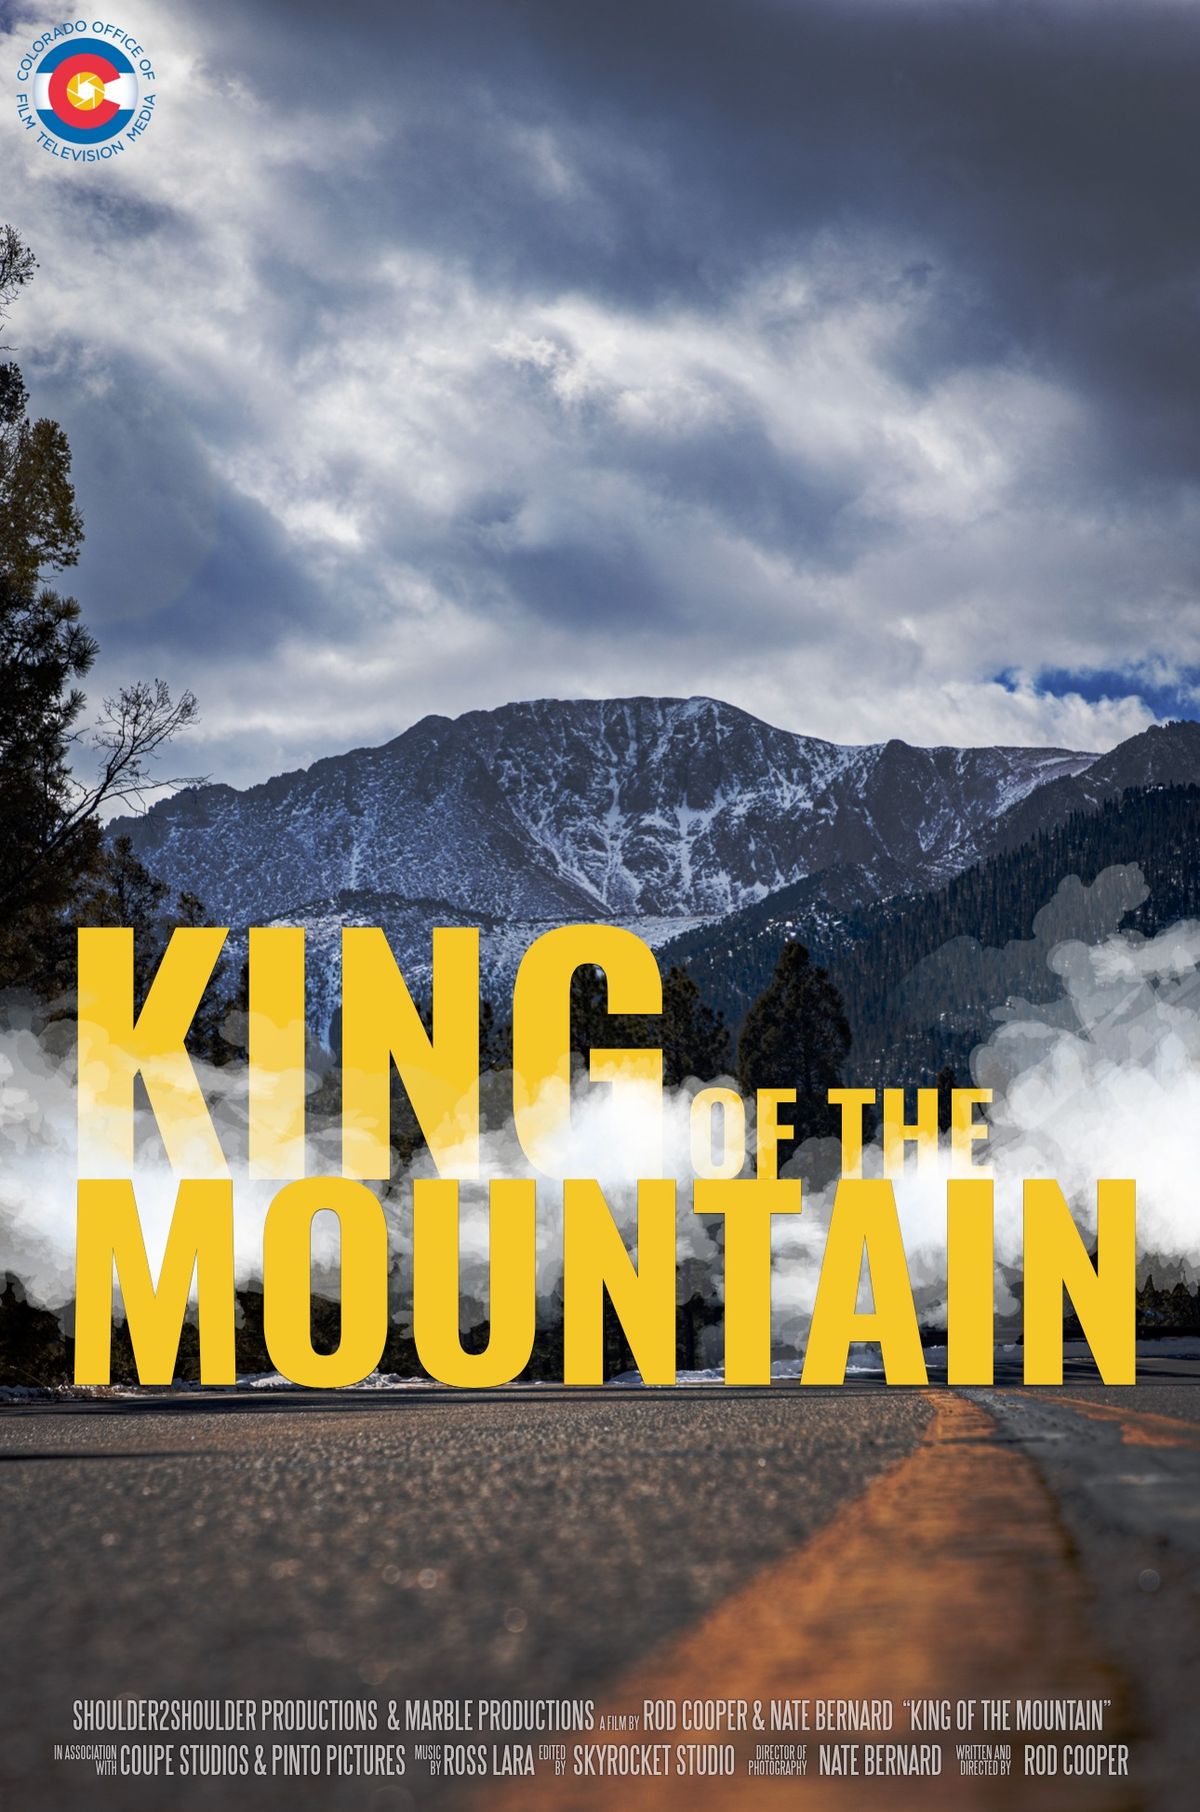 WORLD PREMIERE of King of the Mountain 